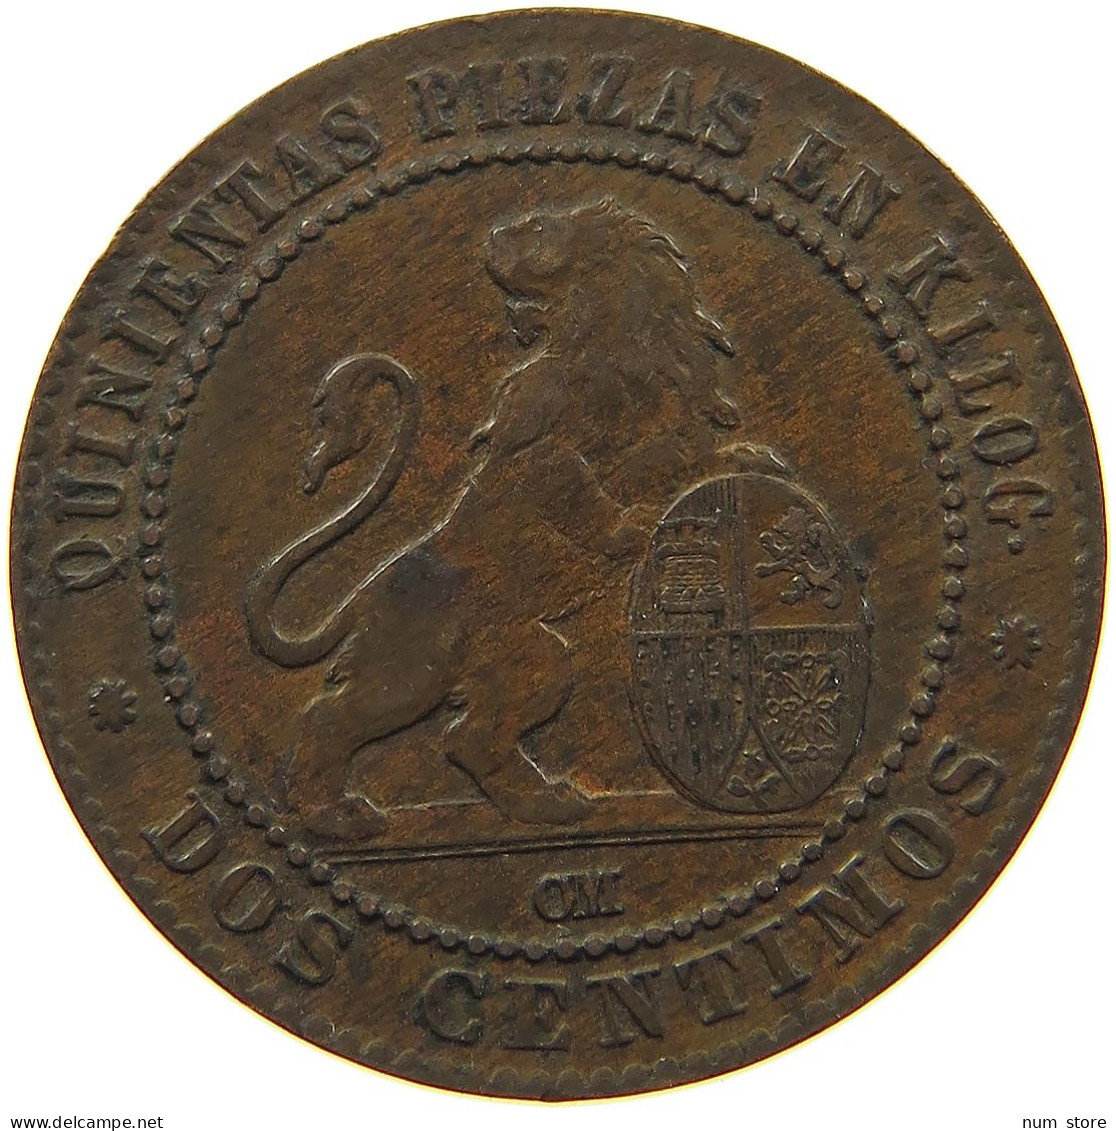 SPAIN 2 CENTIMOS 1870 PROVISIONAL GOVERNMENT #MA 100820 - First Minting